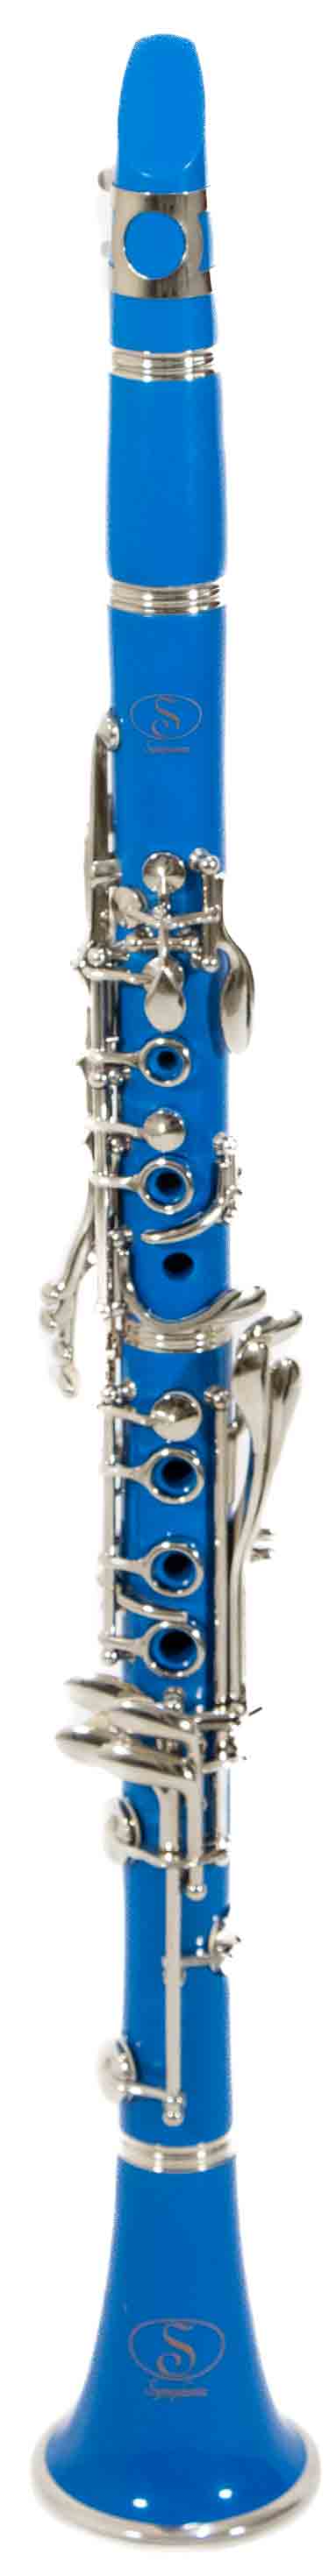 Clarinete Symphonic Azul Tone:Bb Material ABS